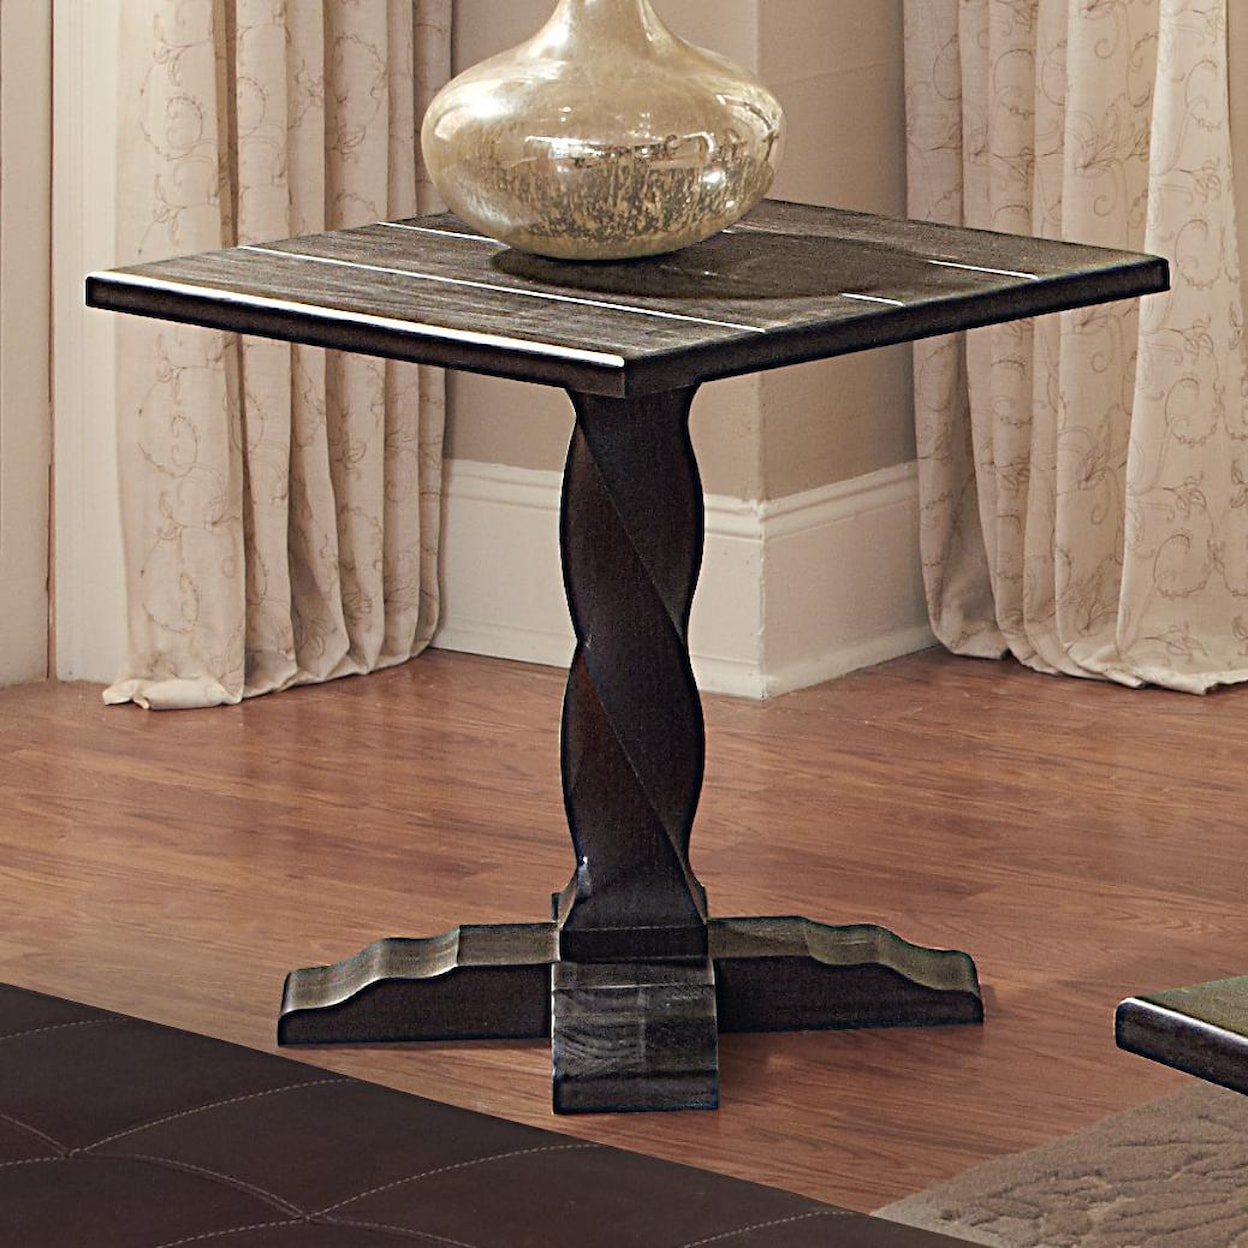 Vaughan Bassett Aspirations - Solid Pine Square End Table